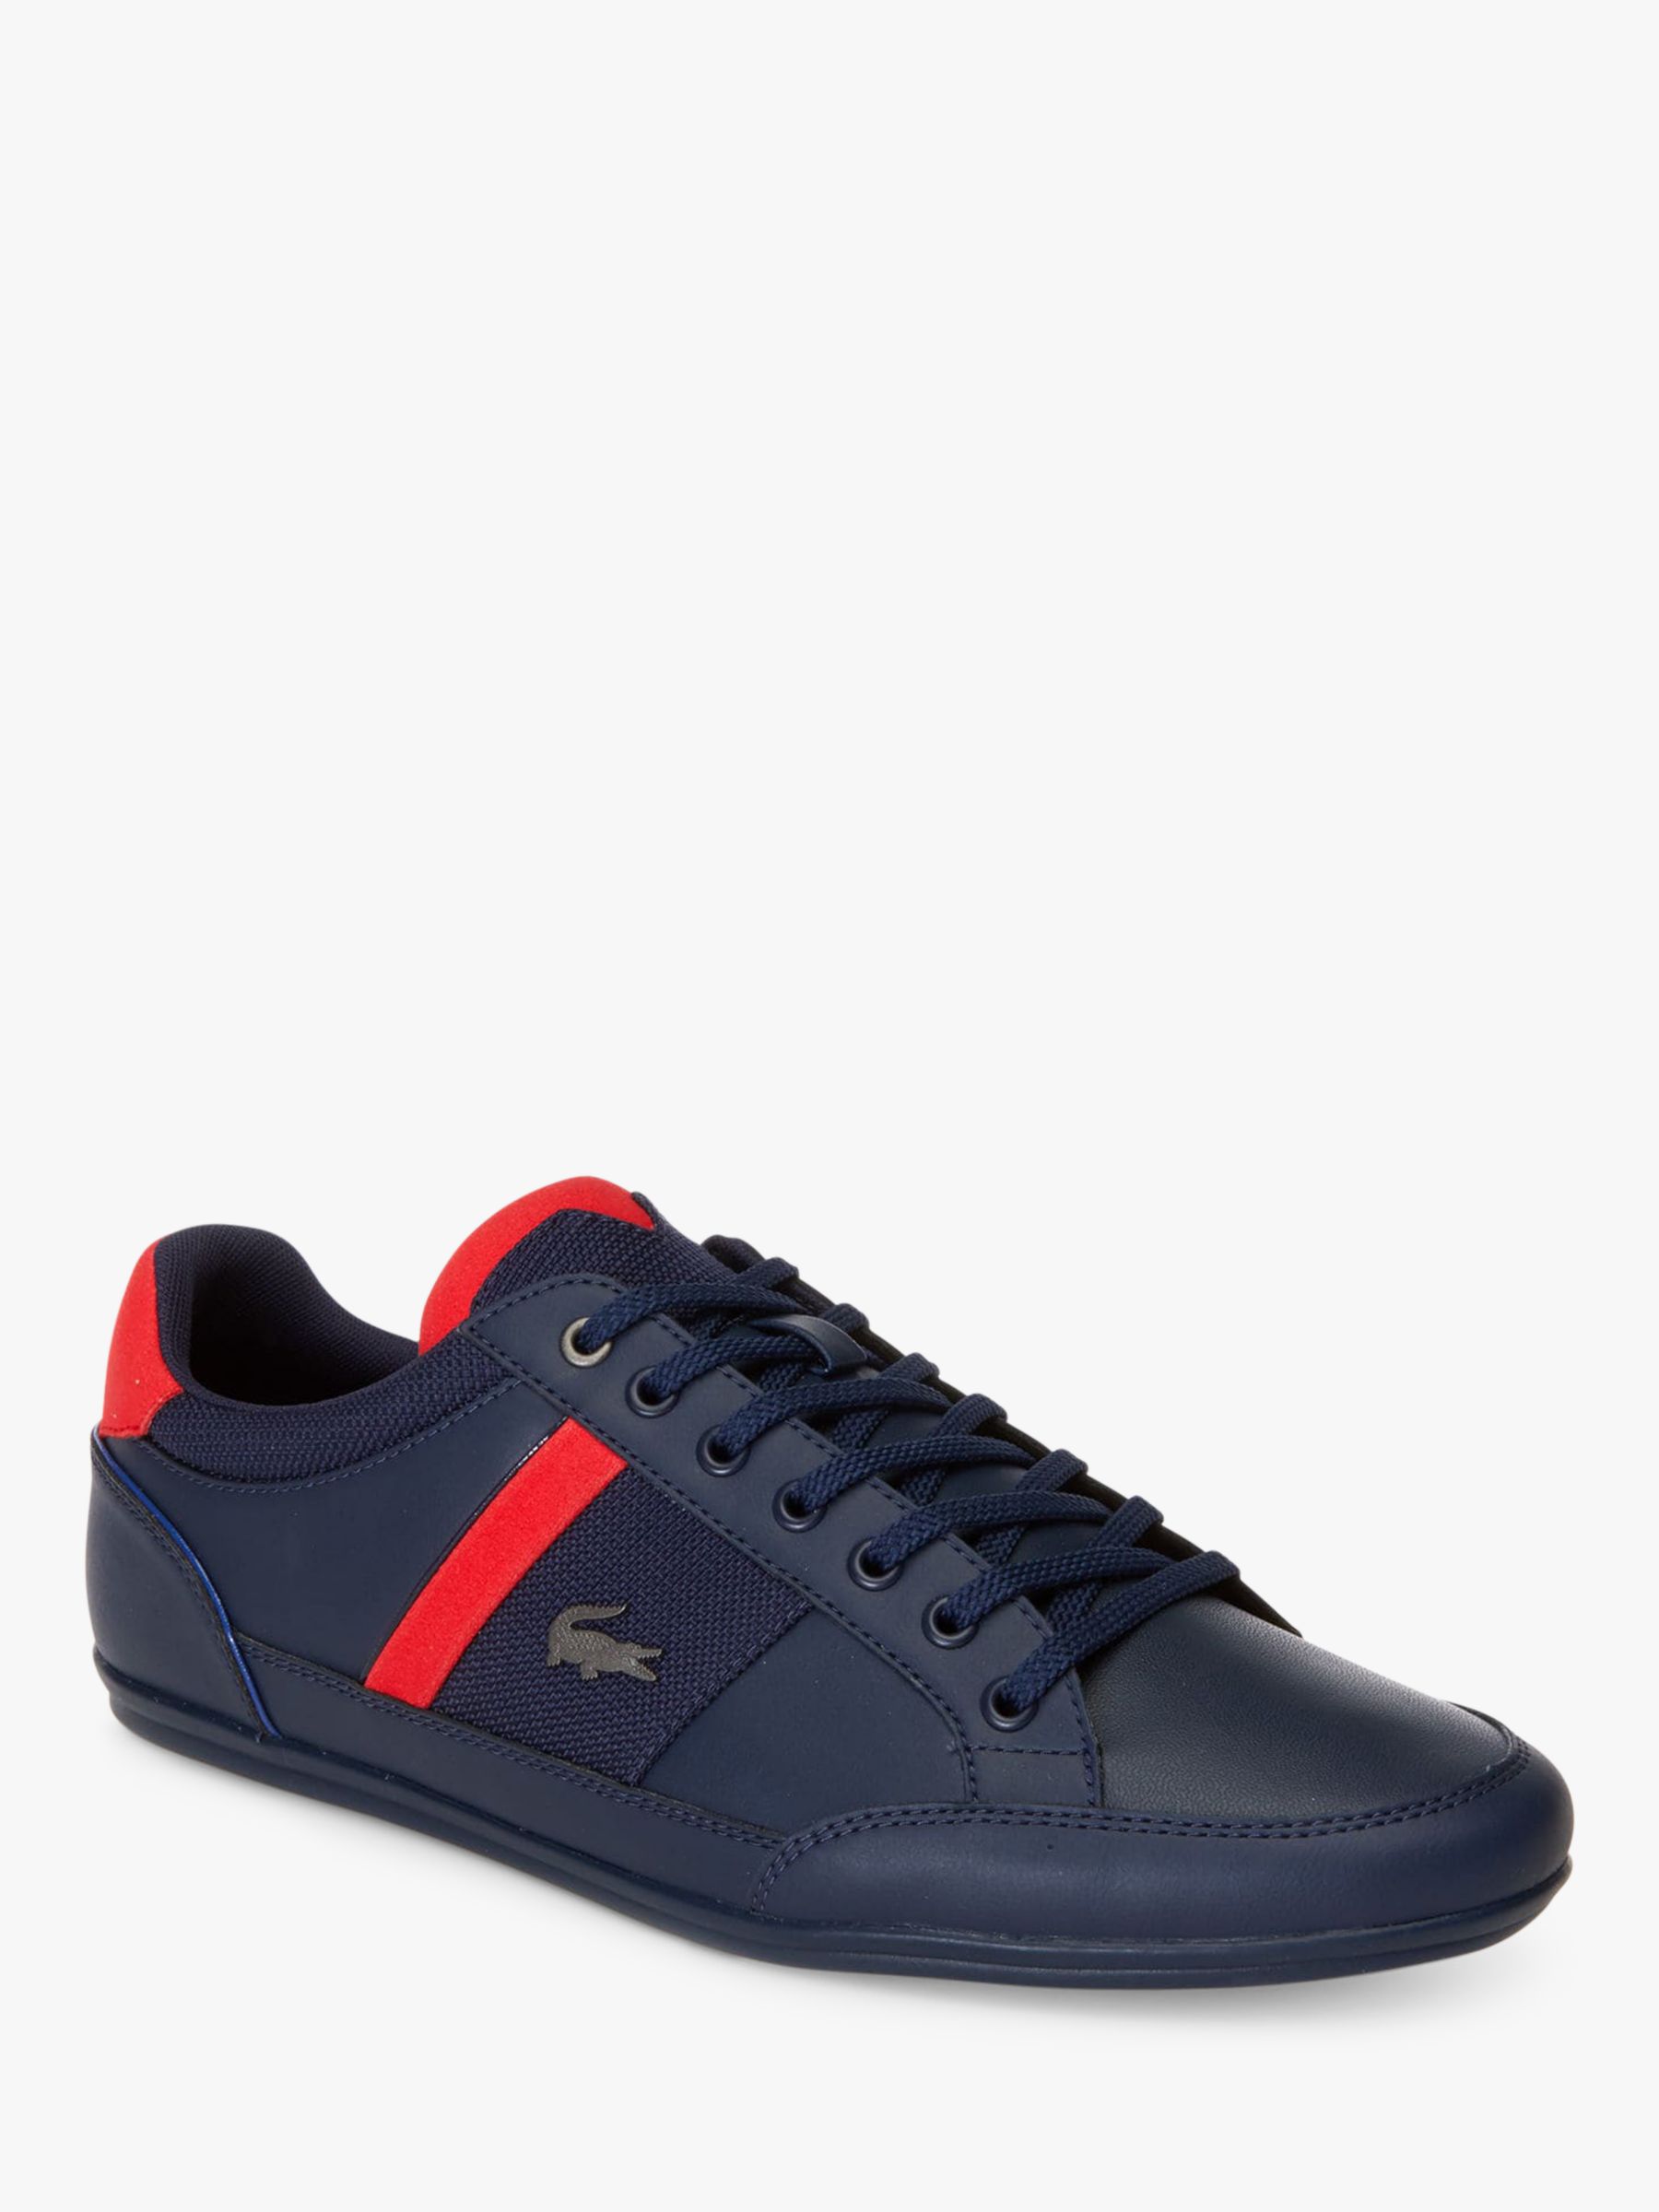 Lacoste Chaymon Trainers, Navy/Red at 